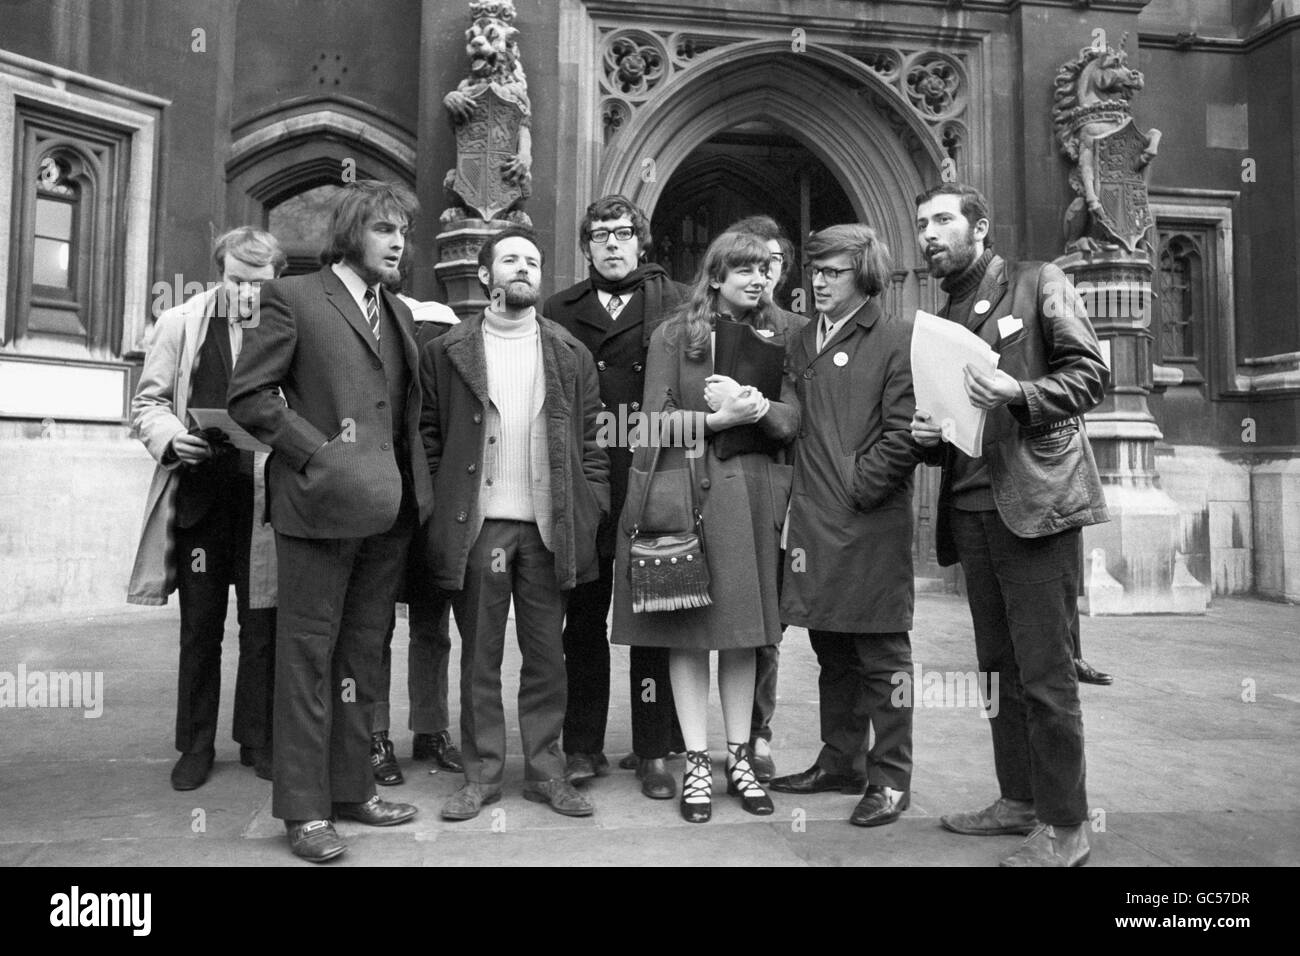 BESPECTACLED AND MUFFLER-WEARING JACK STRAW (C), PRESIDENT OF THE NATIONAL UNION OF STUDENTS, TOGETHER WITH OTHER STUDENTS AT THE HOUSE OF COMMONS WHERE THEY LOBBIED MPs IN CONNECTION WITH THE EXPULSION OF RUDI DUTSCHKE, WHO HAS APPLIED TO WORK IN DENMARK. Stock Photo